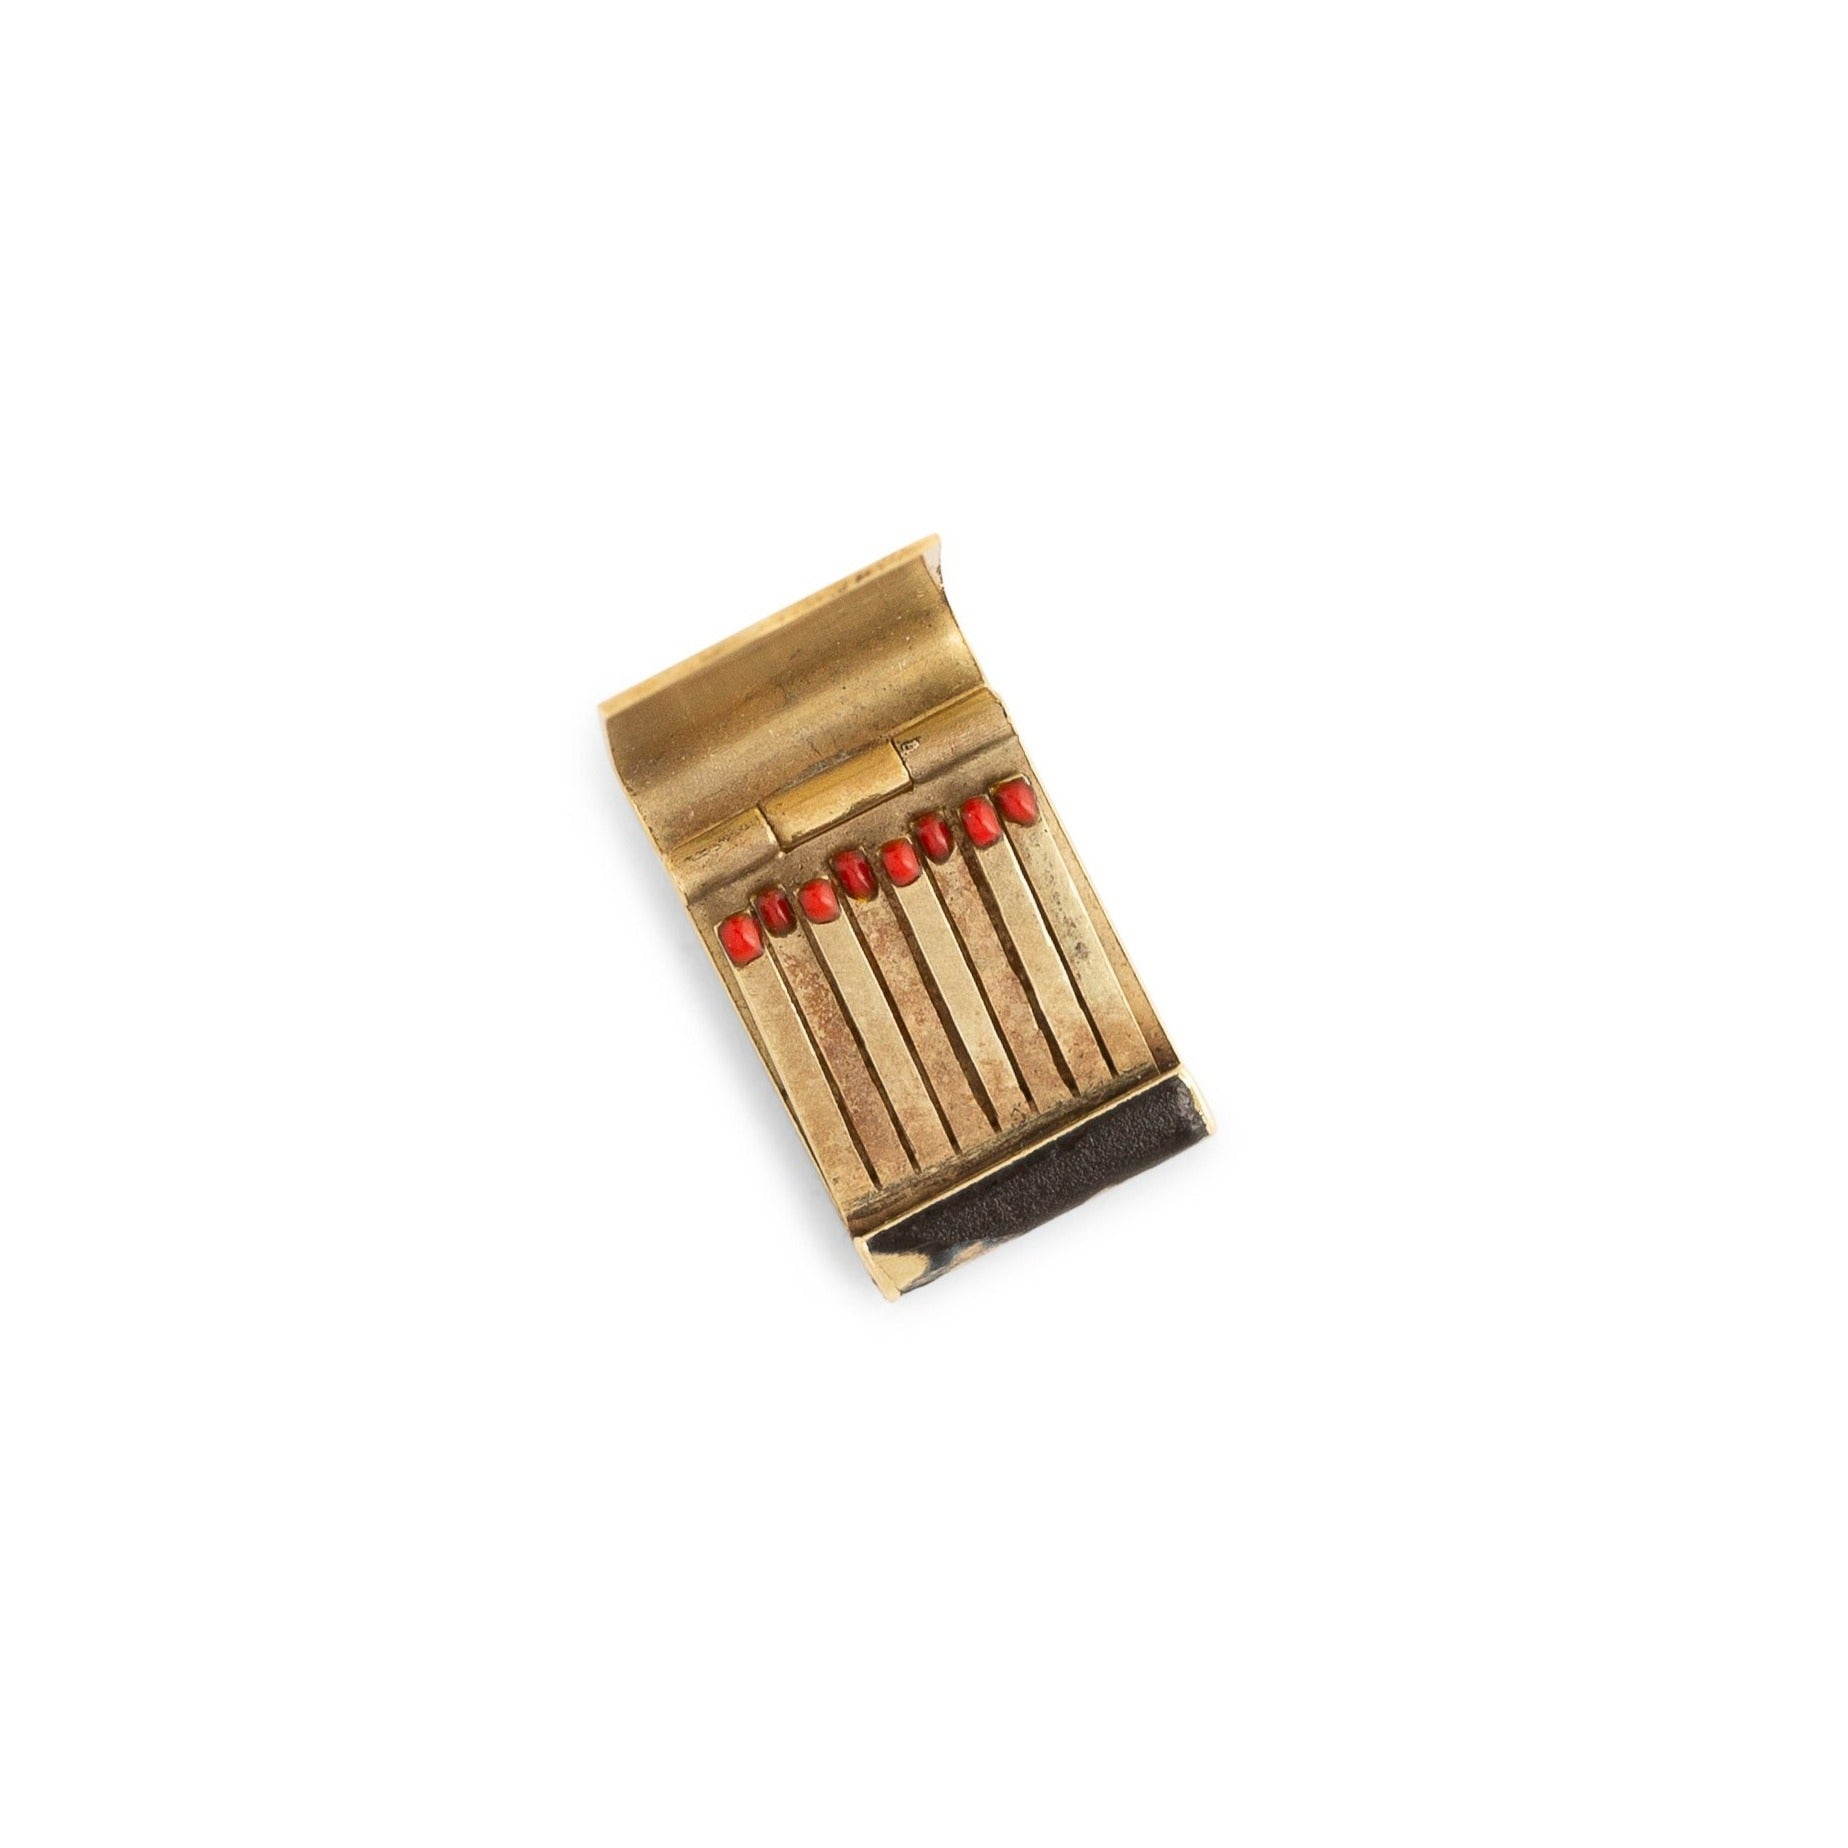 Movable Book of Matches Enamel and 14k Gold Charm